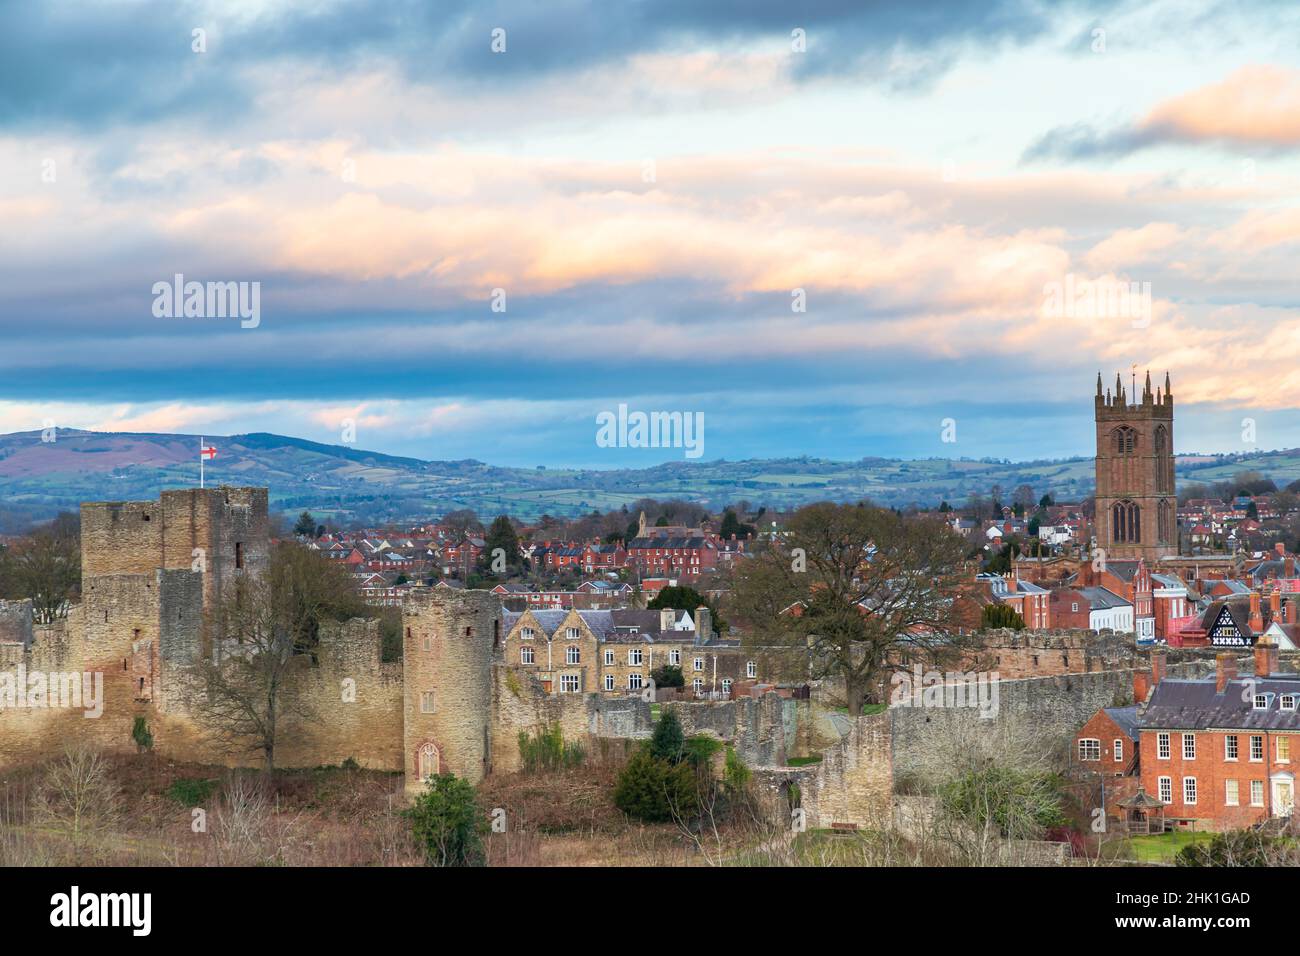 A view of the marrket town of Ludlow in Shropshire UK, showing the castle and St Lawrence's Church as the sun sets Stock Photo